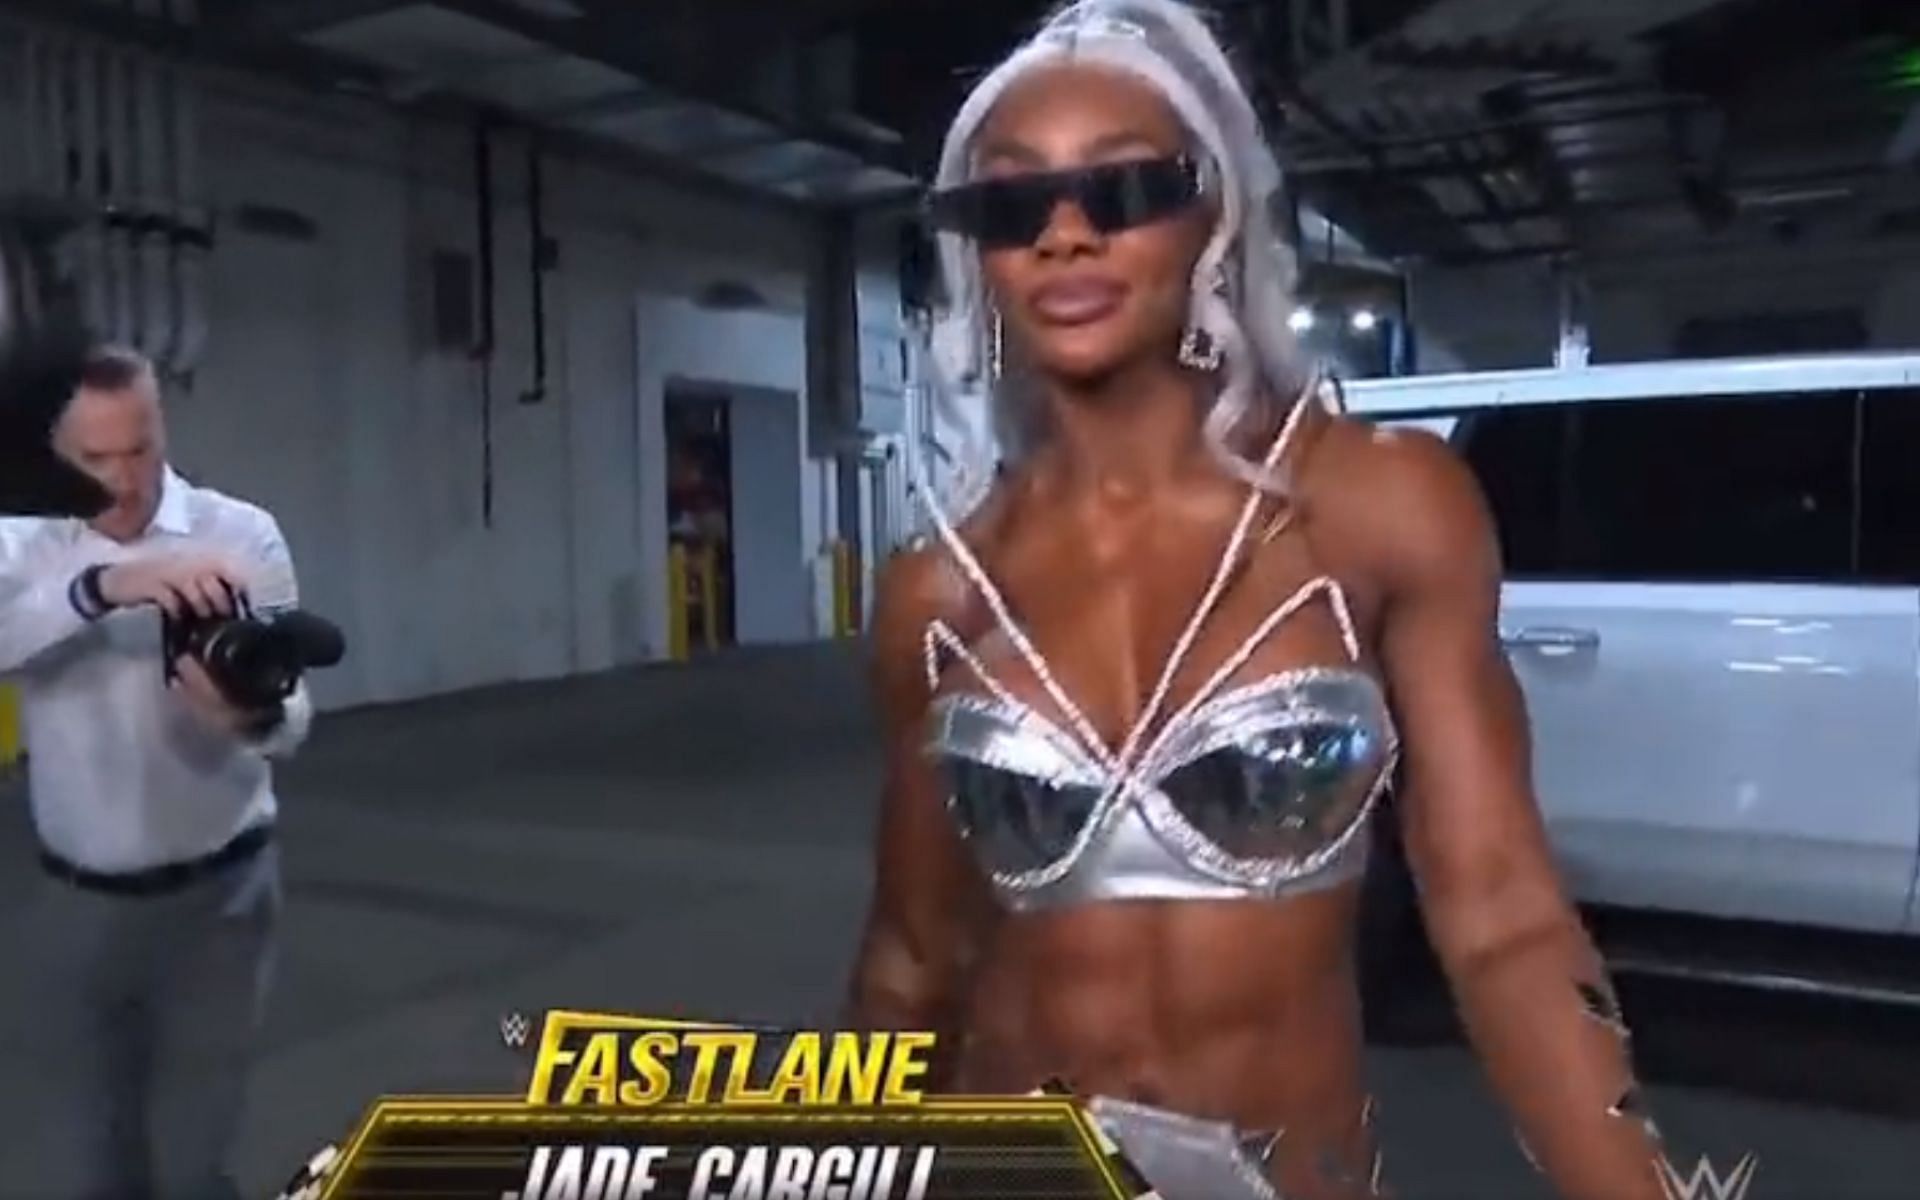 The former AEW star is finally here!